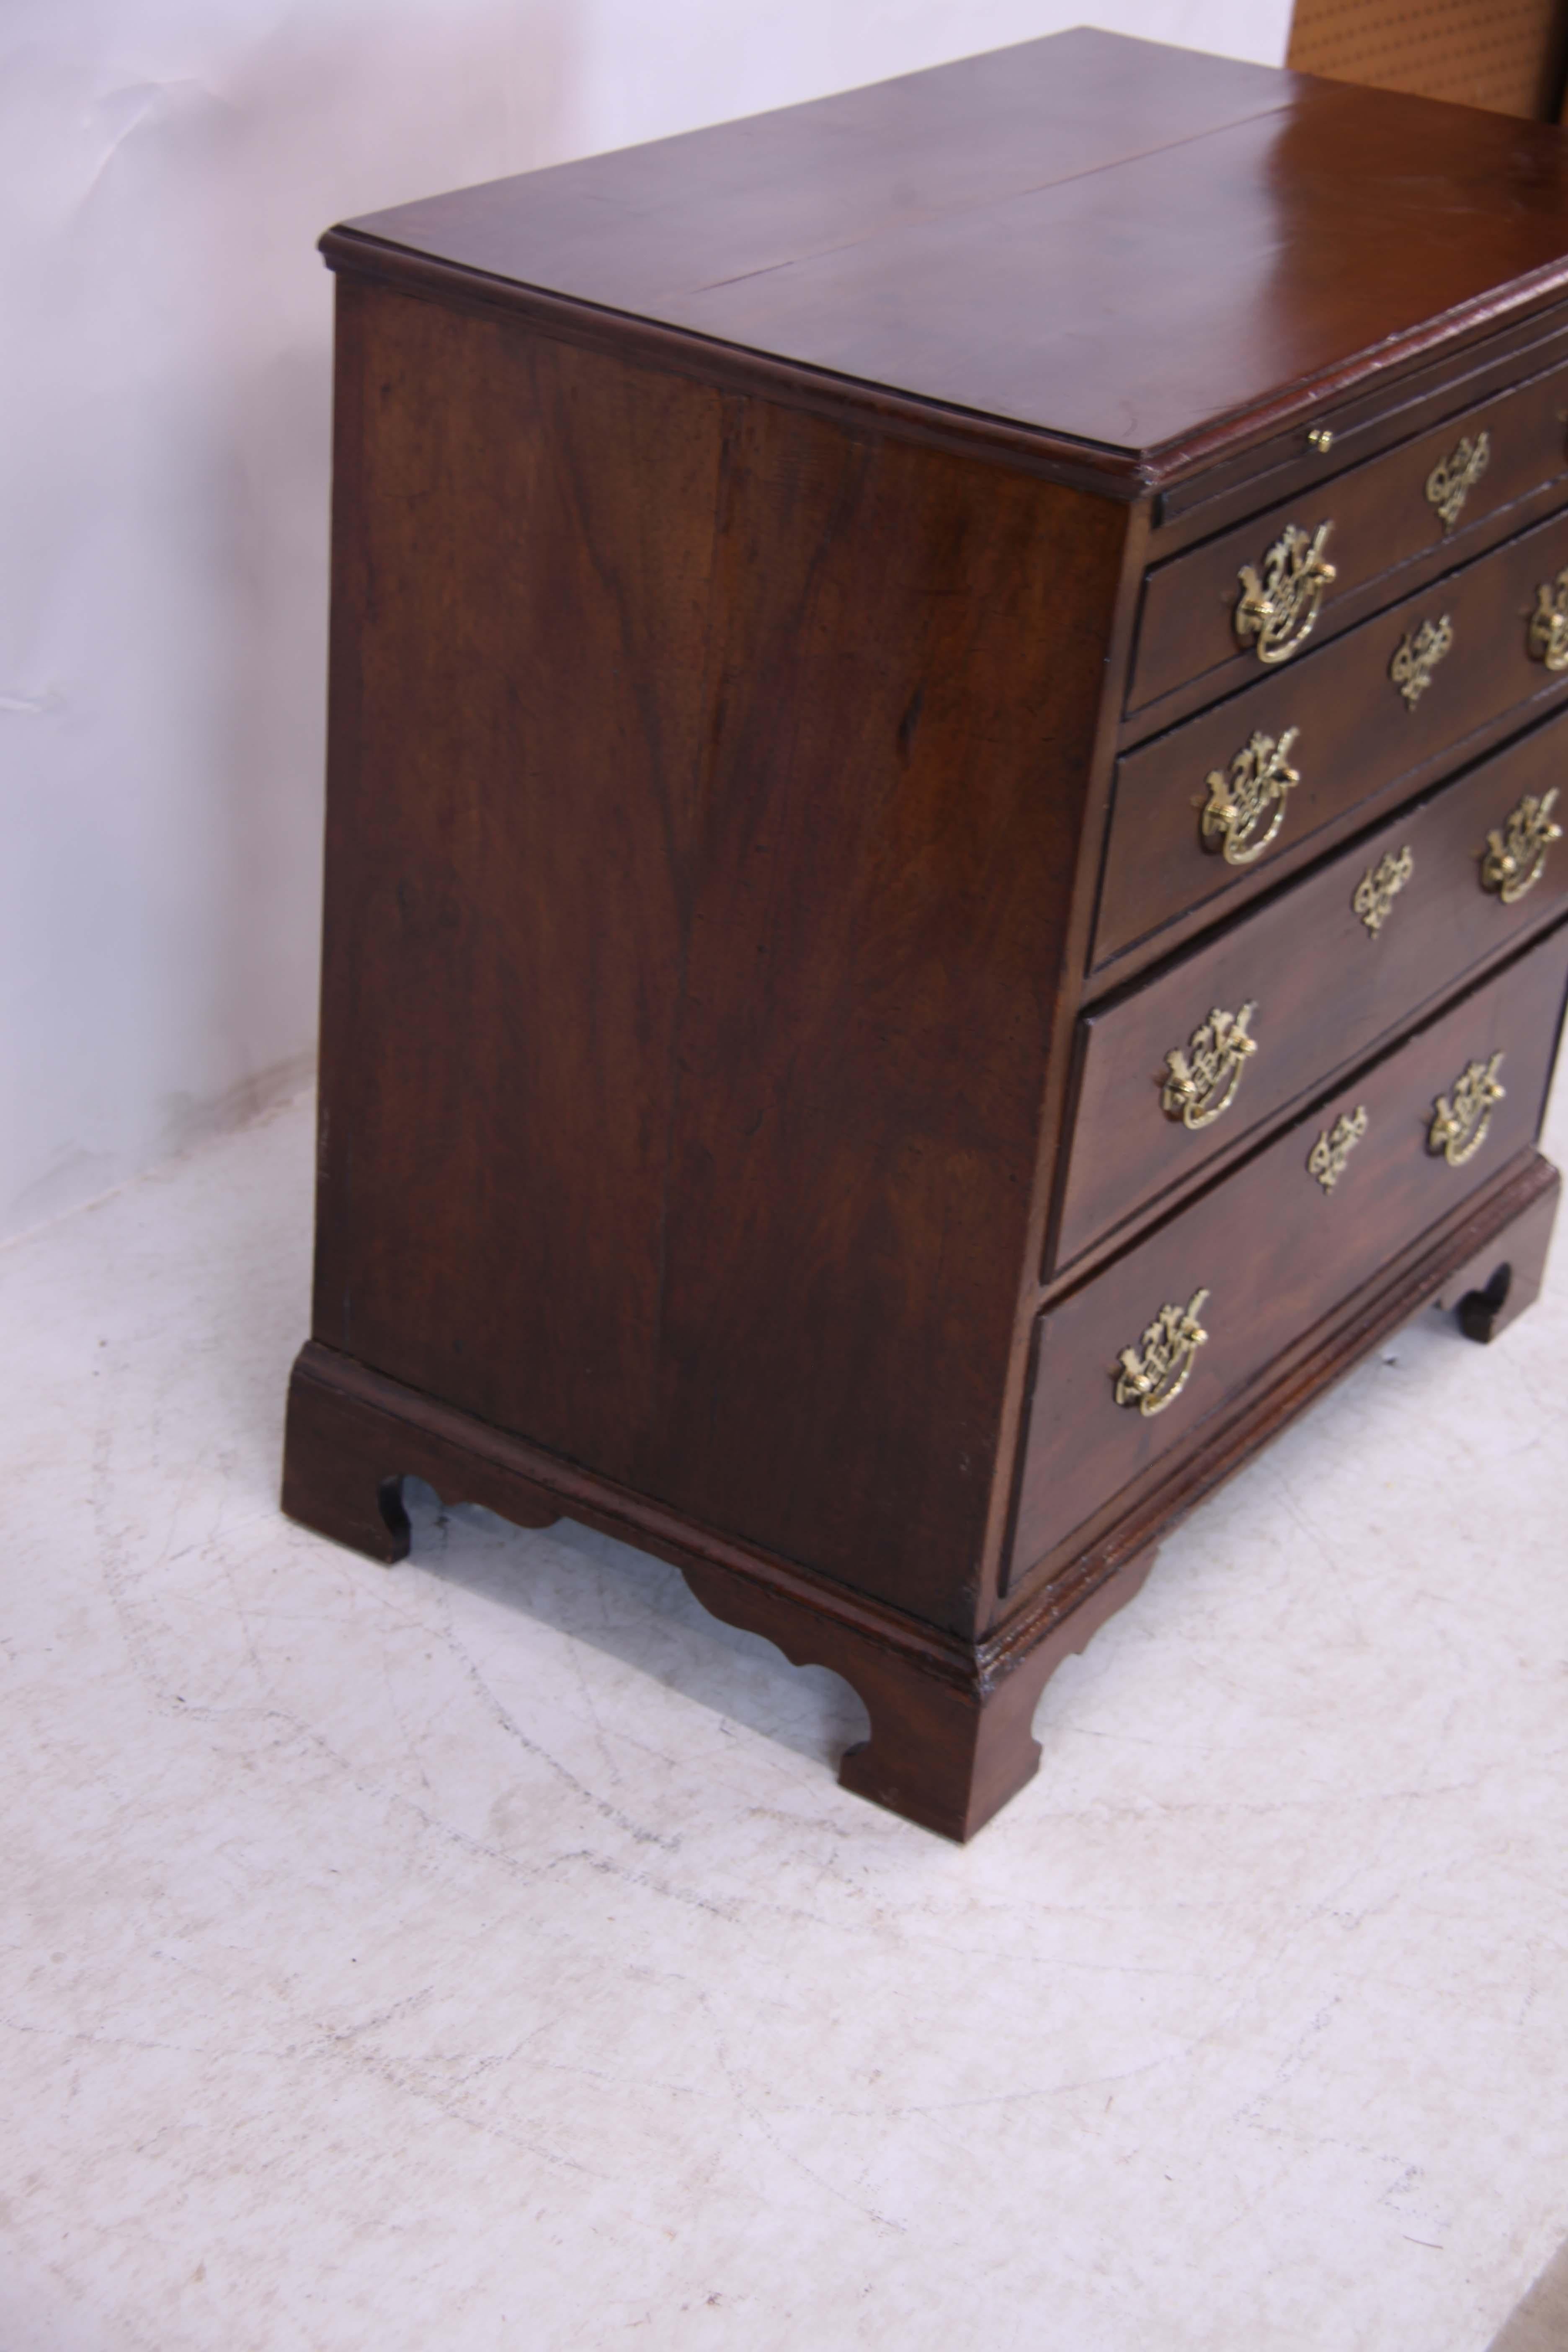 18th century English Chippendale bachelor's chest, having four cock beaded and graduated drawers with reticulated fretwork pulls below pull out brushing slide, on bracket feet.